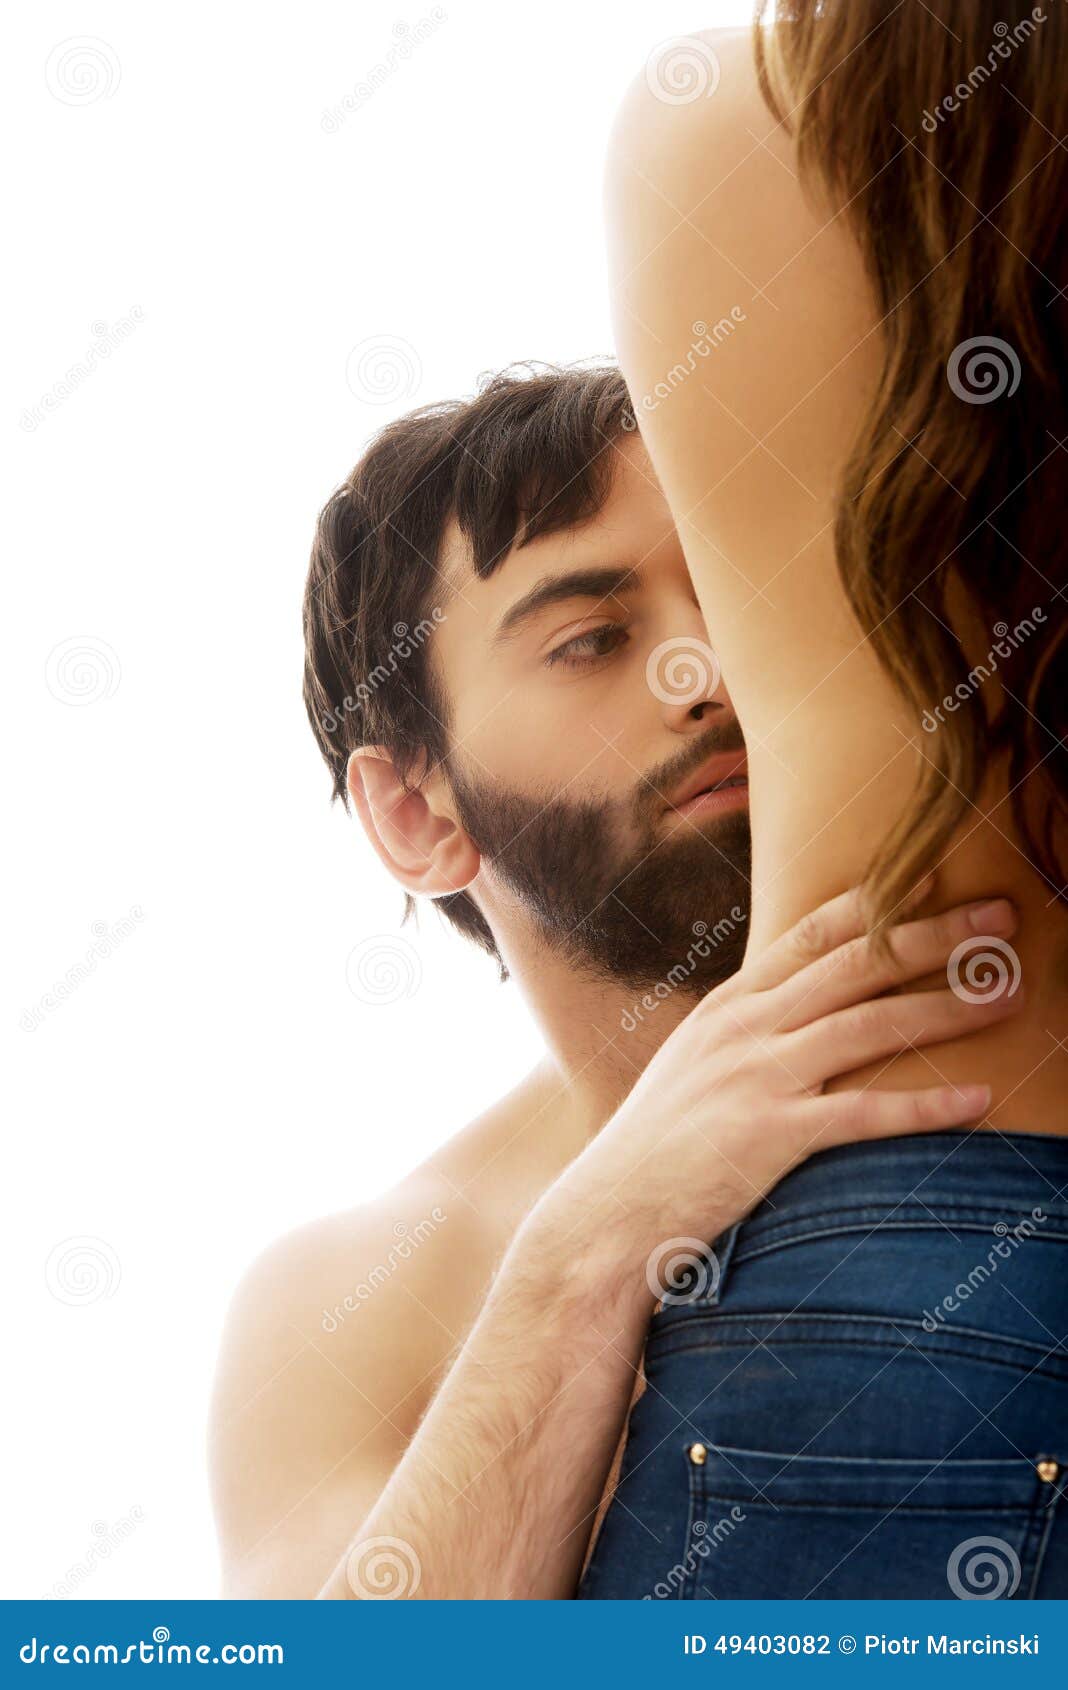 Man Touching Silm Woman S Waist. Stock Photo - Image of sexual